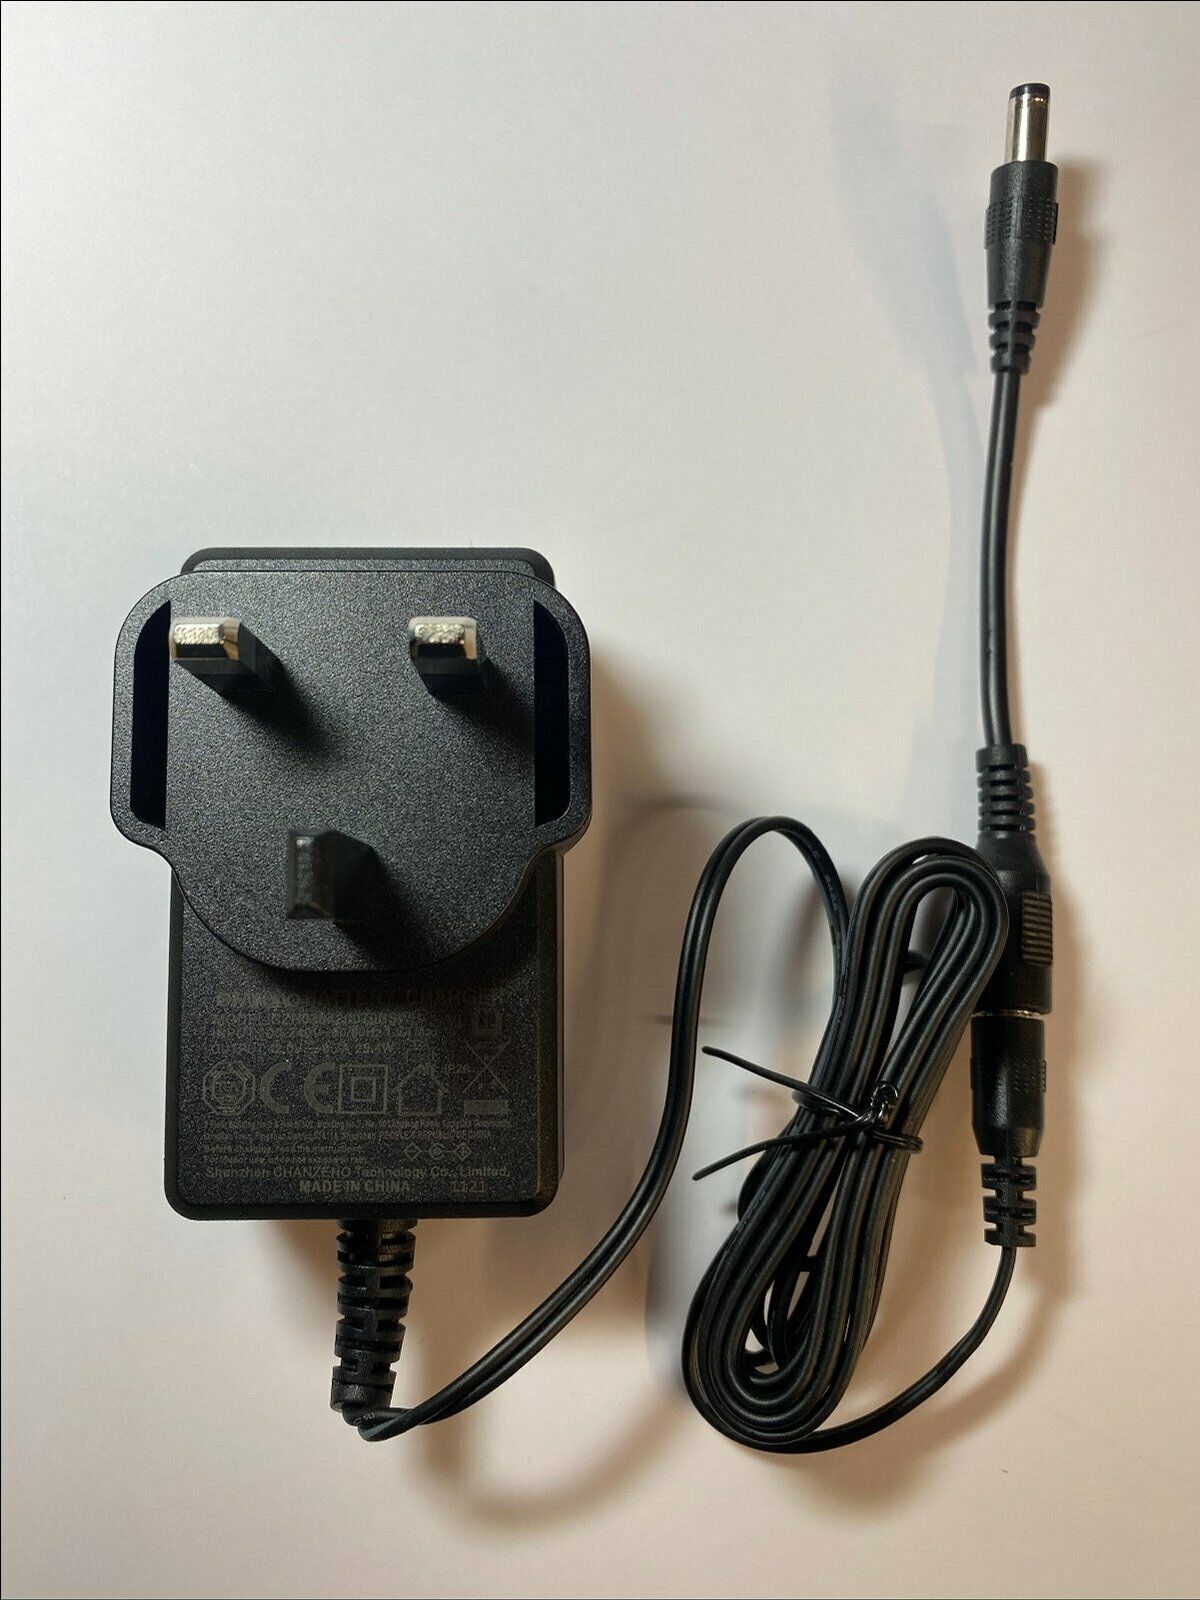 Replacement Charger for Vax VBT3ASV1 Blade 2 Max Cordless Vacuum Cleaner Output Current: 500MA M